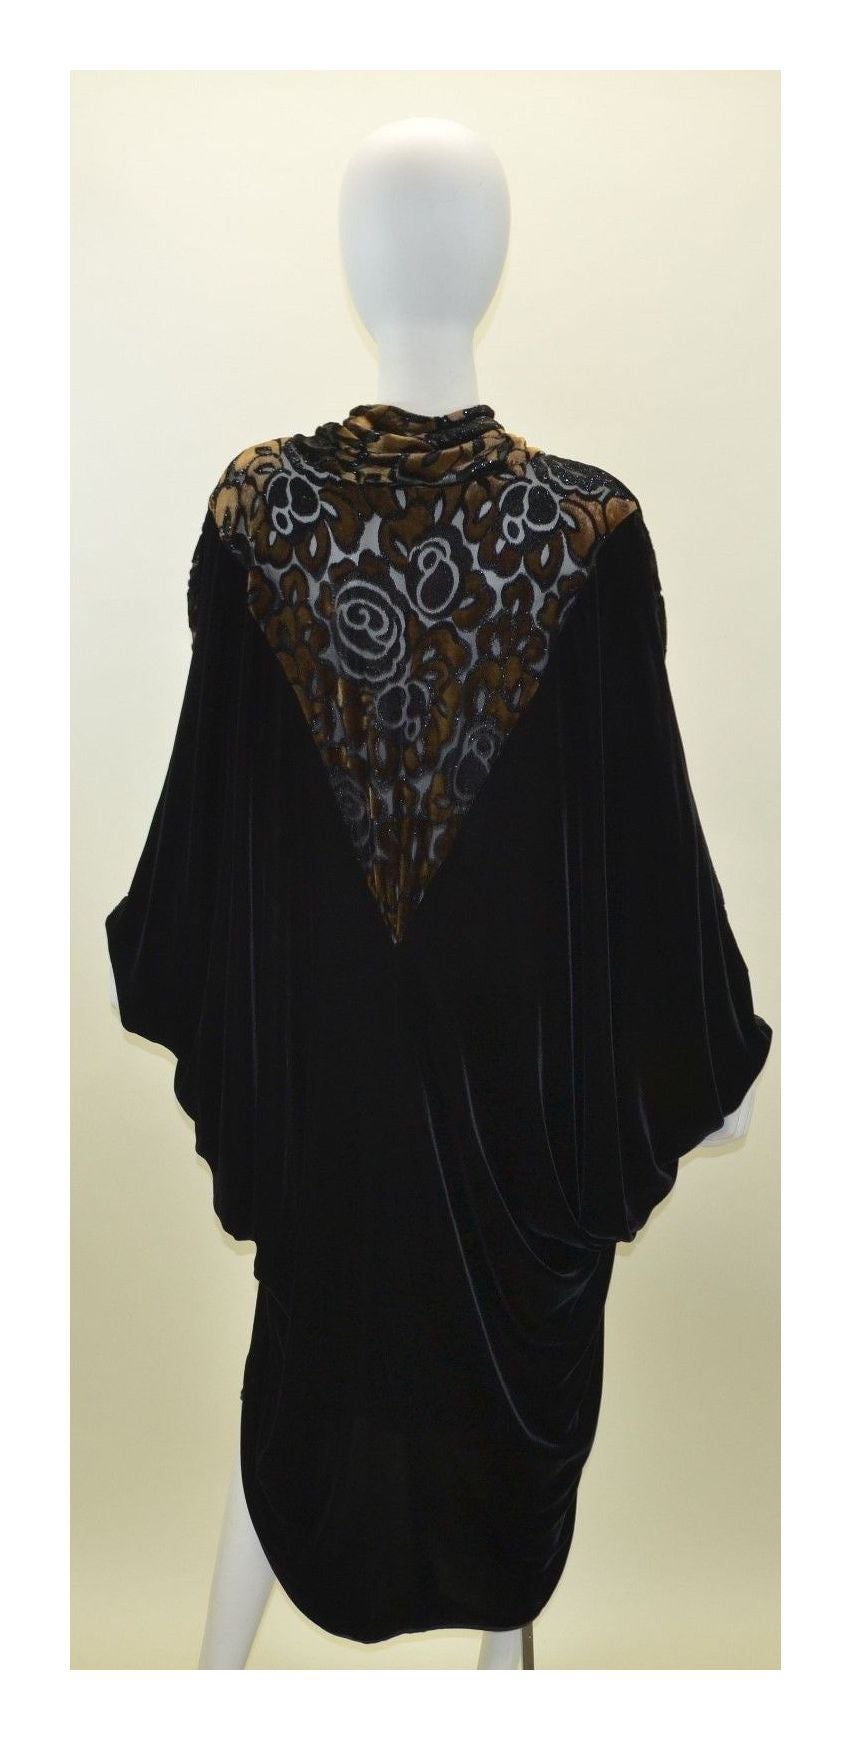 Vintage Janice Wainwright Dolman Batwin Sleeve Dress Caftan was made in England, size UK 12, 65% rayon, 27% silk, and 8% polyester, and a satin trim at the neck. Bronze/brown velvet detailing along the neckline and sleeves.

Measurements: 
Bust -